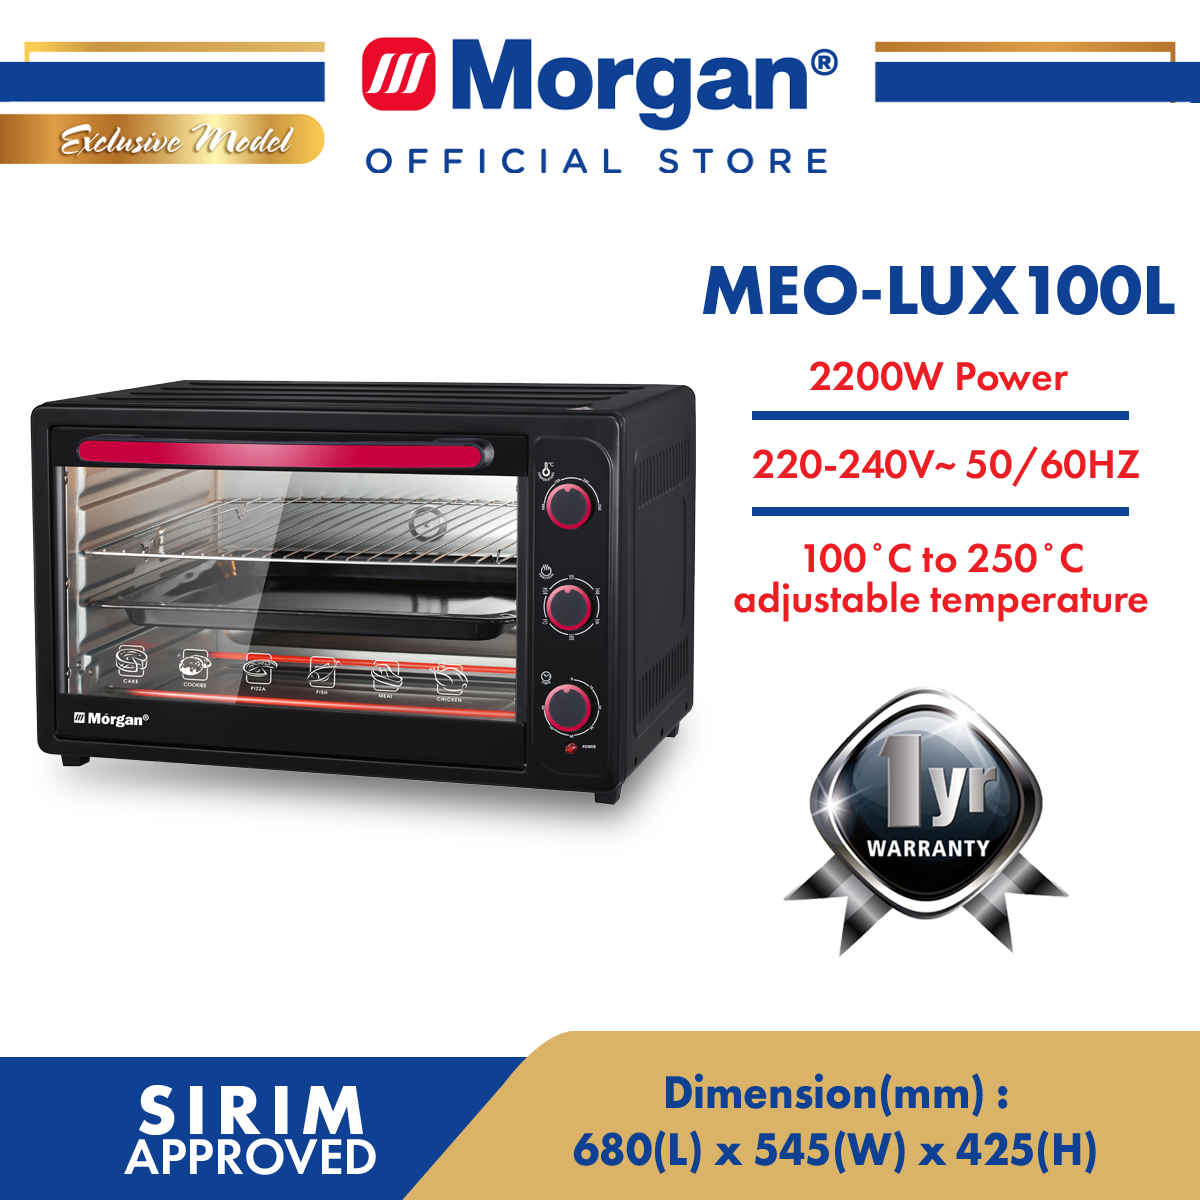 [EXCLUSIVE] MORGAN MEO-LUX100L ELECTRIC OVEN 100L ROTISSERIE CONVECTION